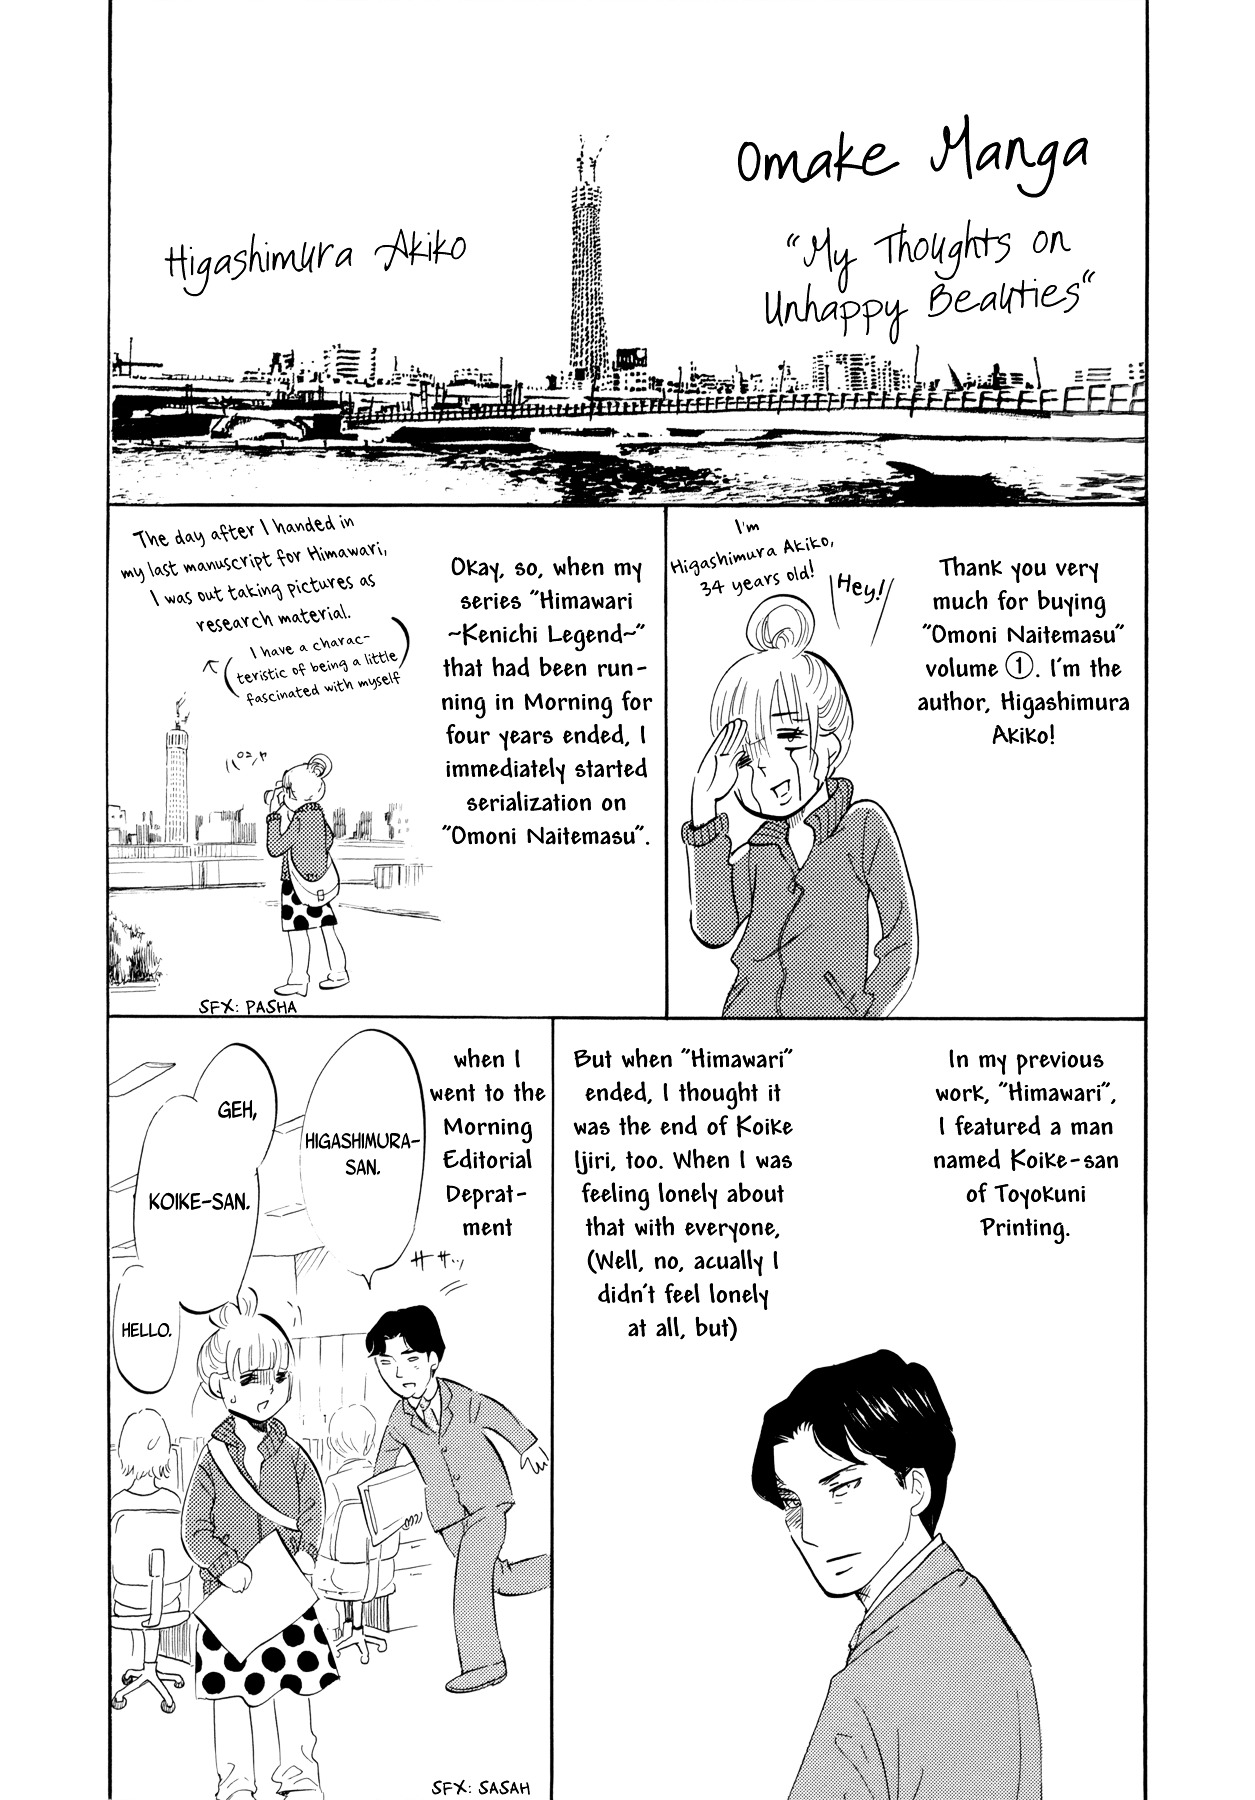 100-Year-Old Top Chef Vol.1 Chapter 11.5 : Omake Manga -- 